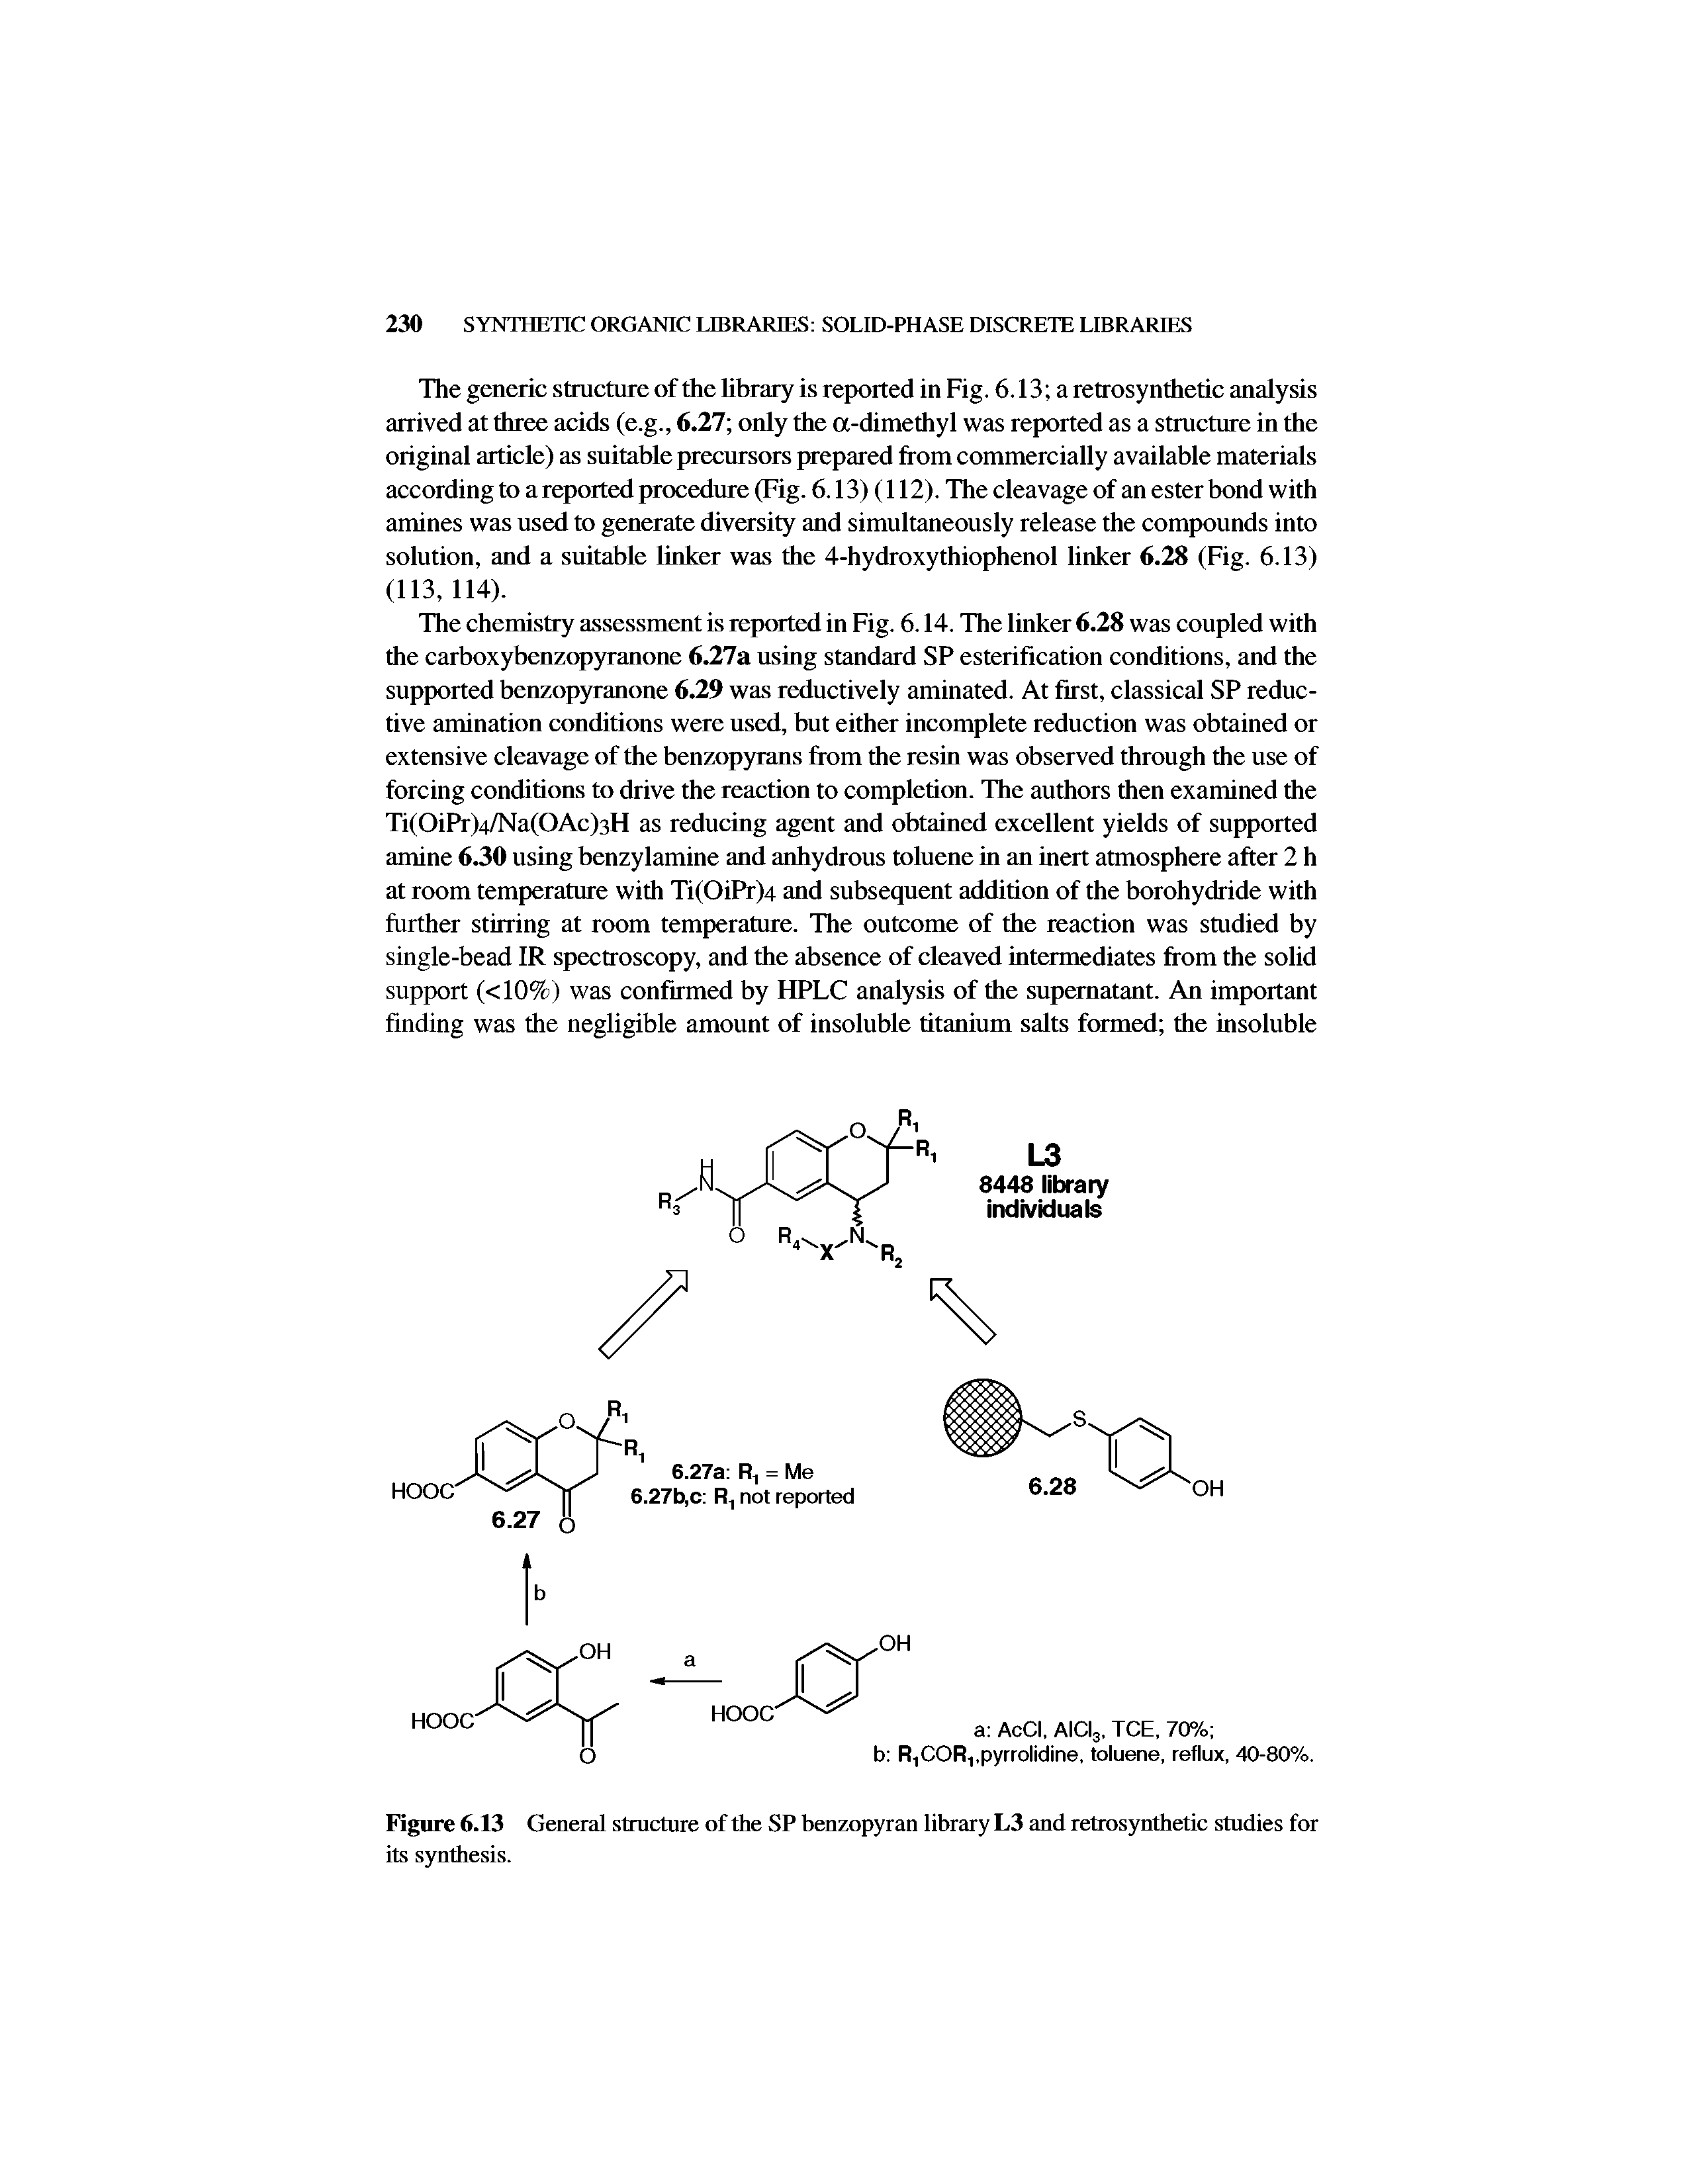 Figure 6.13 General structure of the SP benzopyran library L3 and retrosynthetic studies for its synthesis.